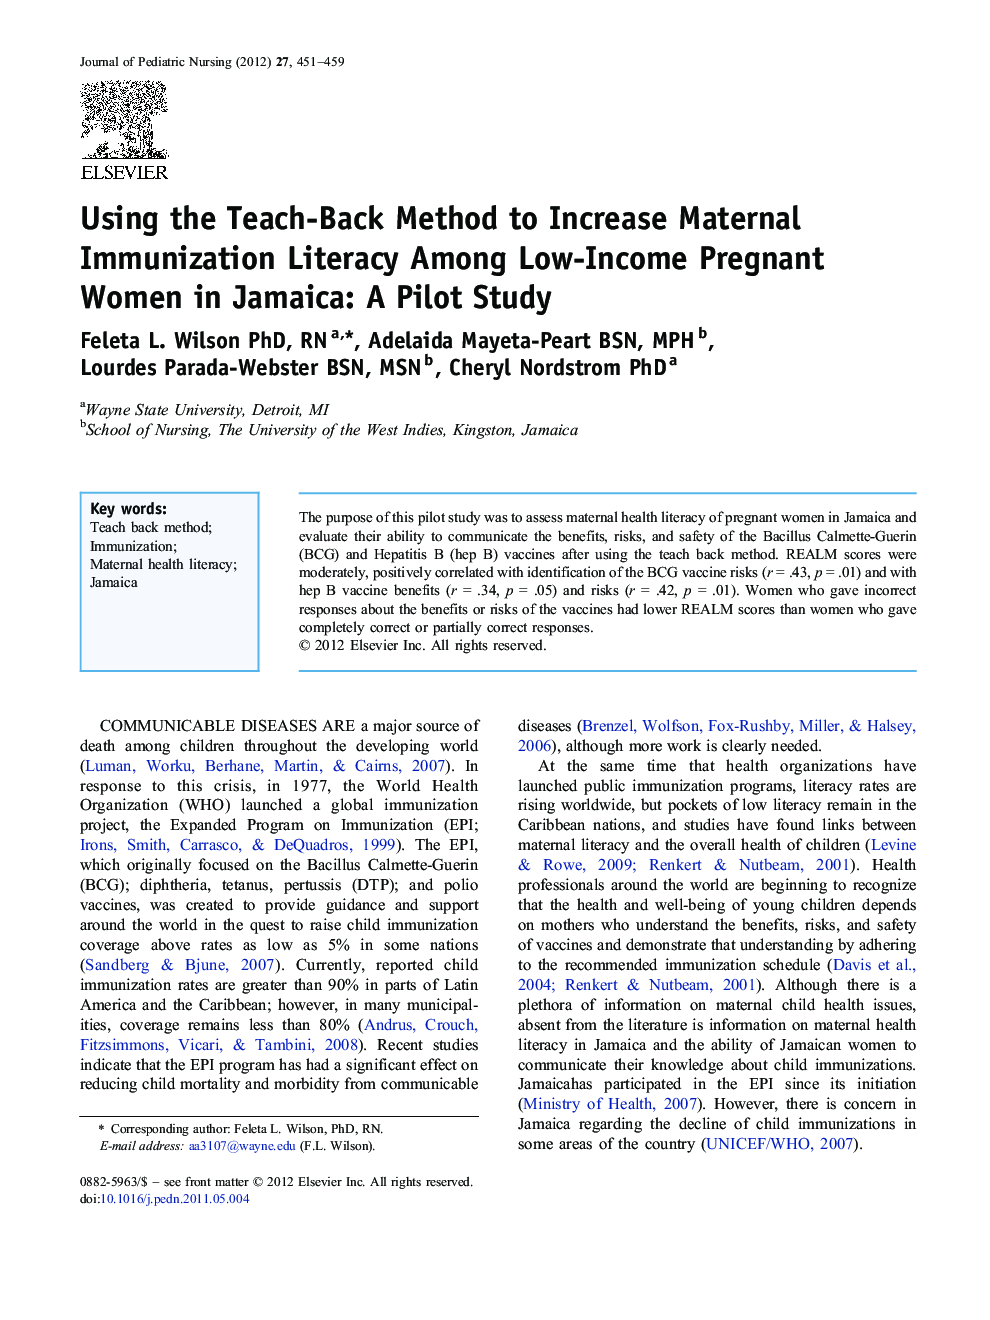 Using the Teach-Back Method to Increase Maternal Immunization Literacy Among Low-Income Pregnant Women in Jamaica: A Pilot Study